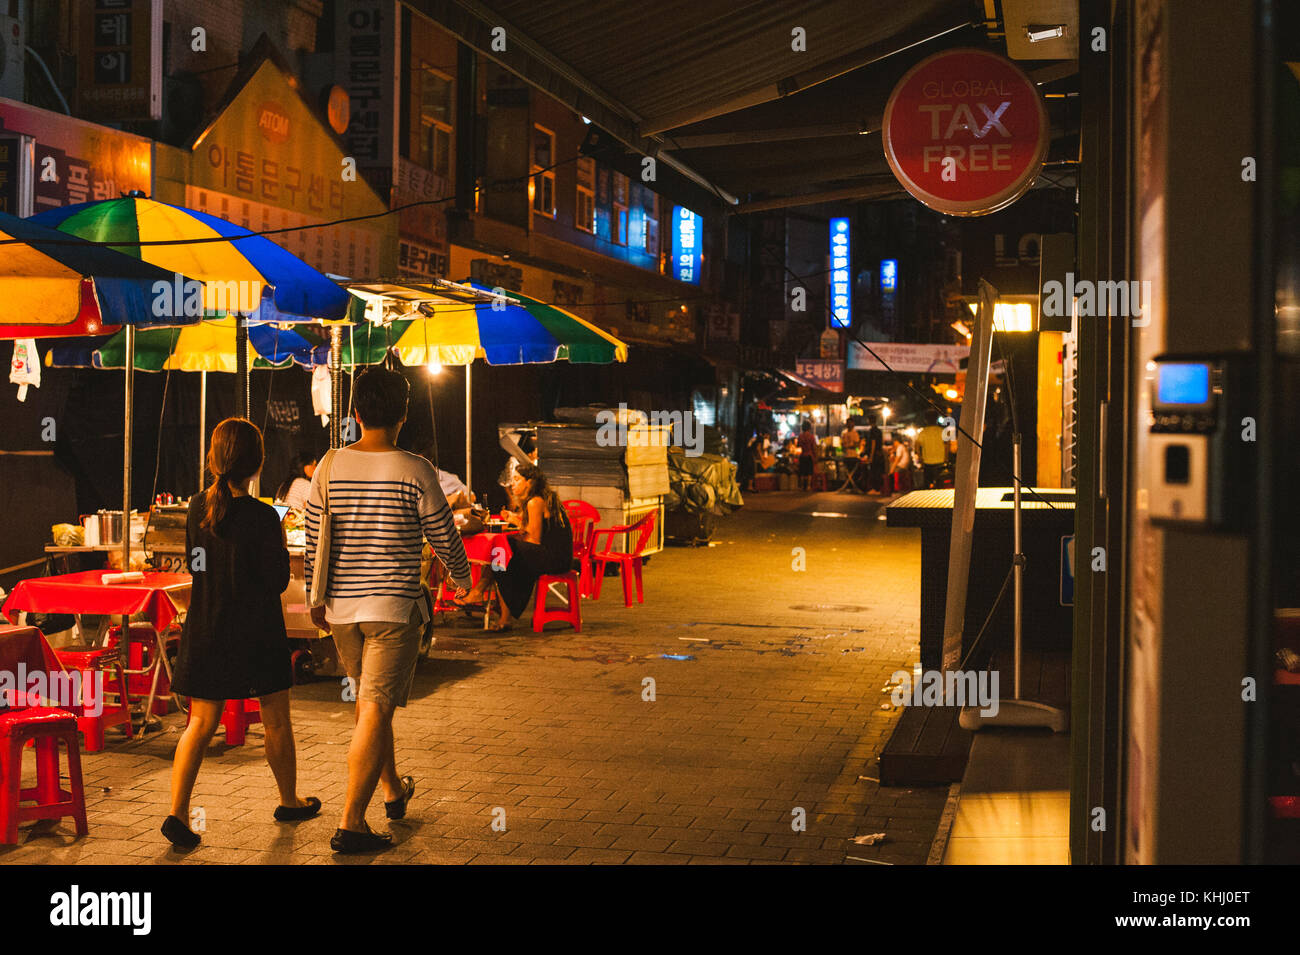 A shot of a couple walking past a street food stall at night in Namdaemun market, Seoul, South Korea Stock Photo